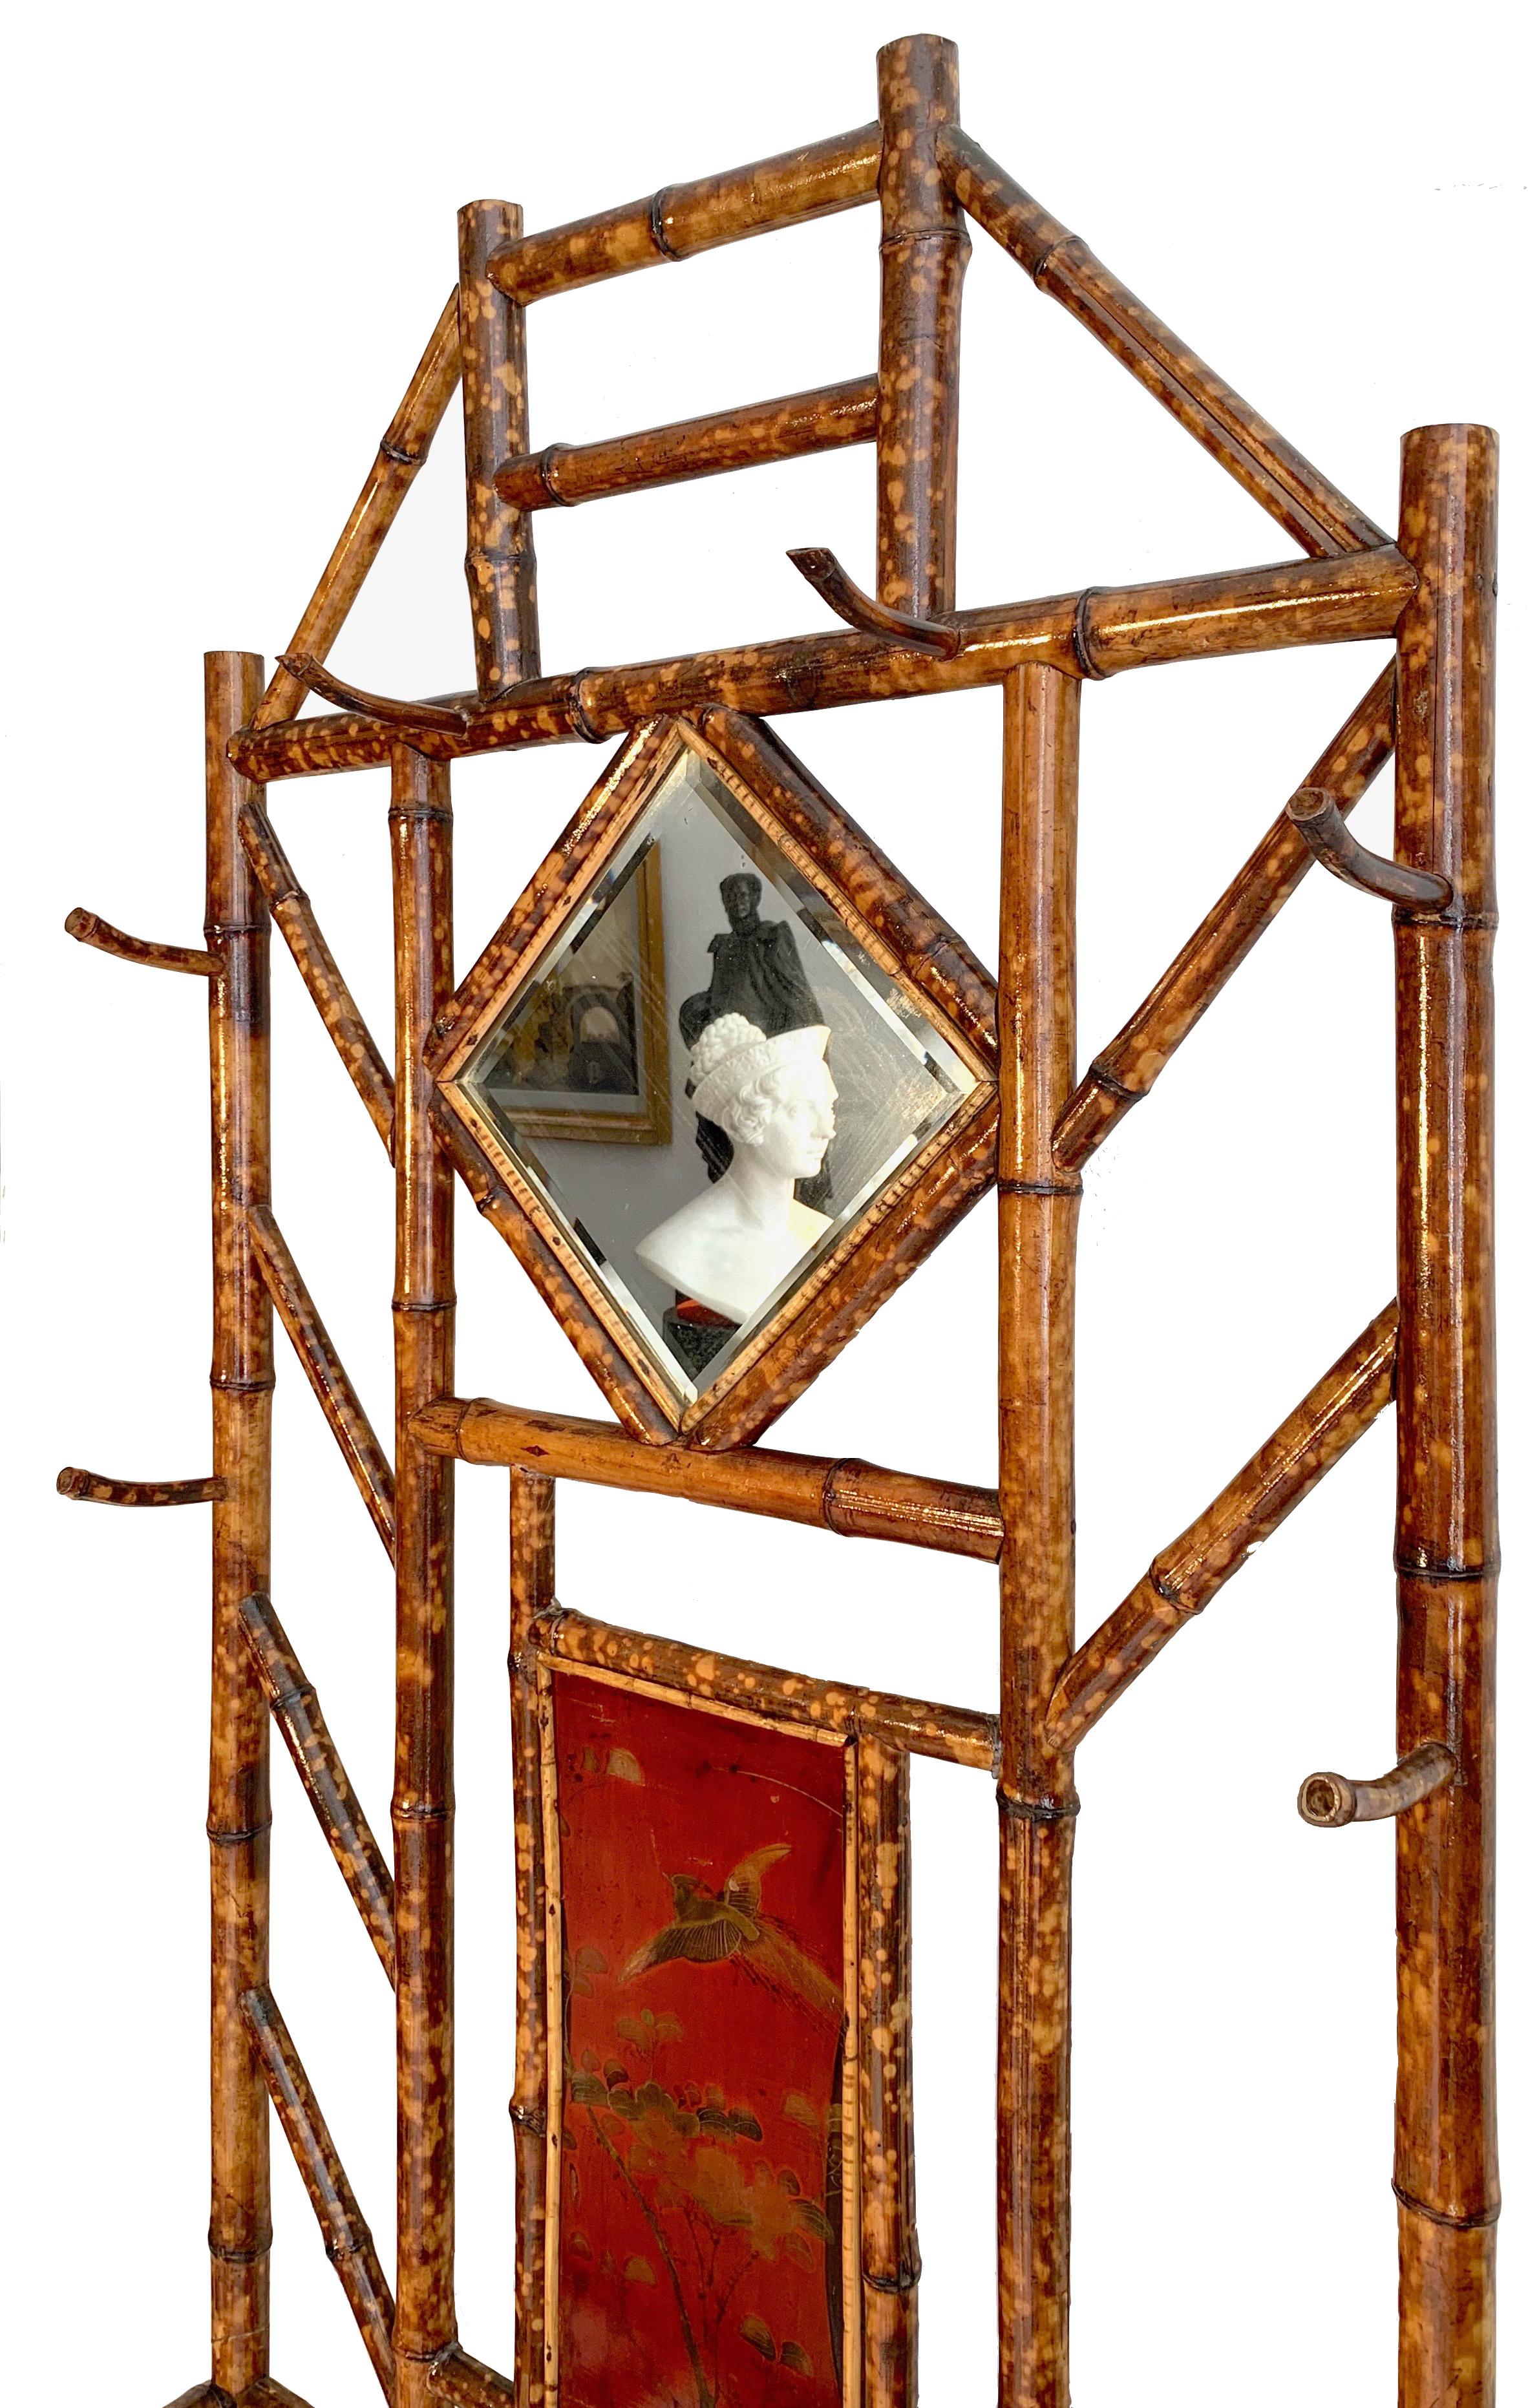 This elegant and rare bamboo wardrobe is decorated with painted lacquer panels in the Japanese taste and retains the original faceted mirror.